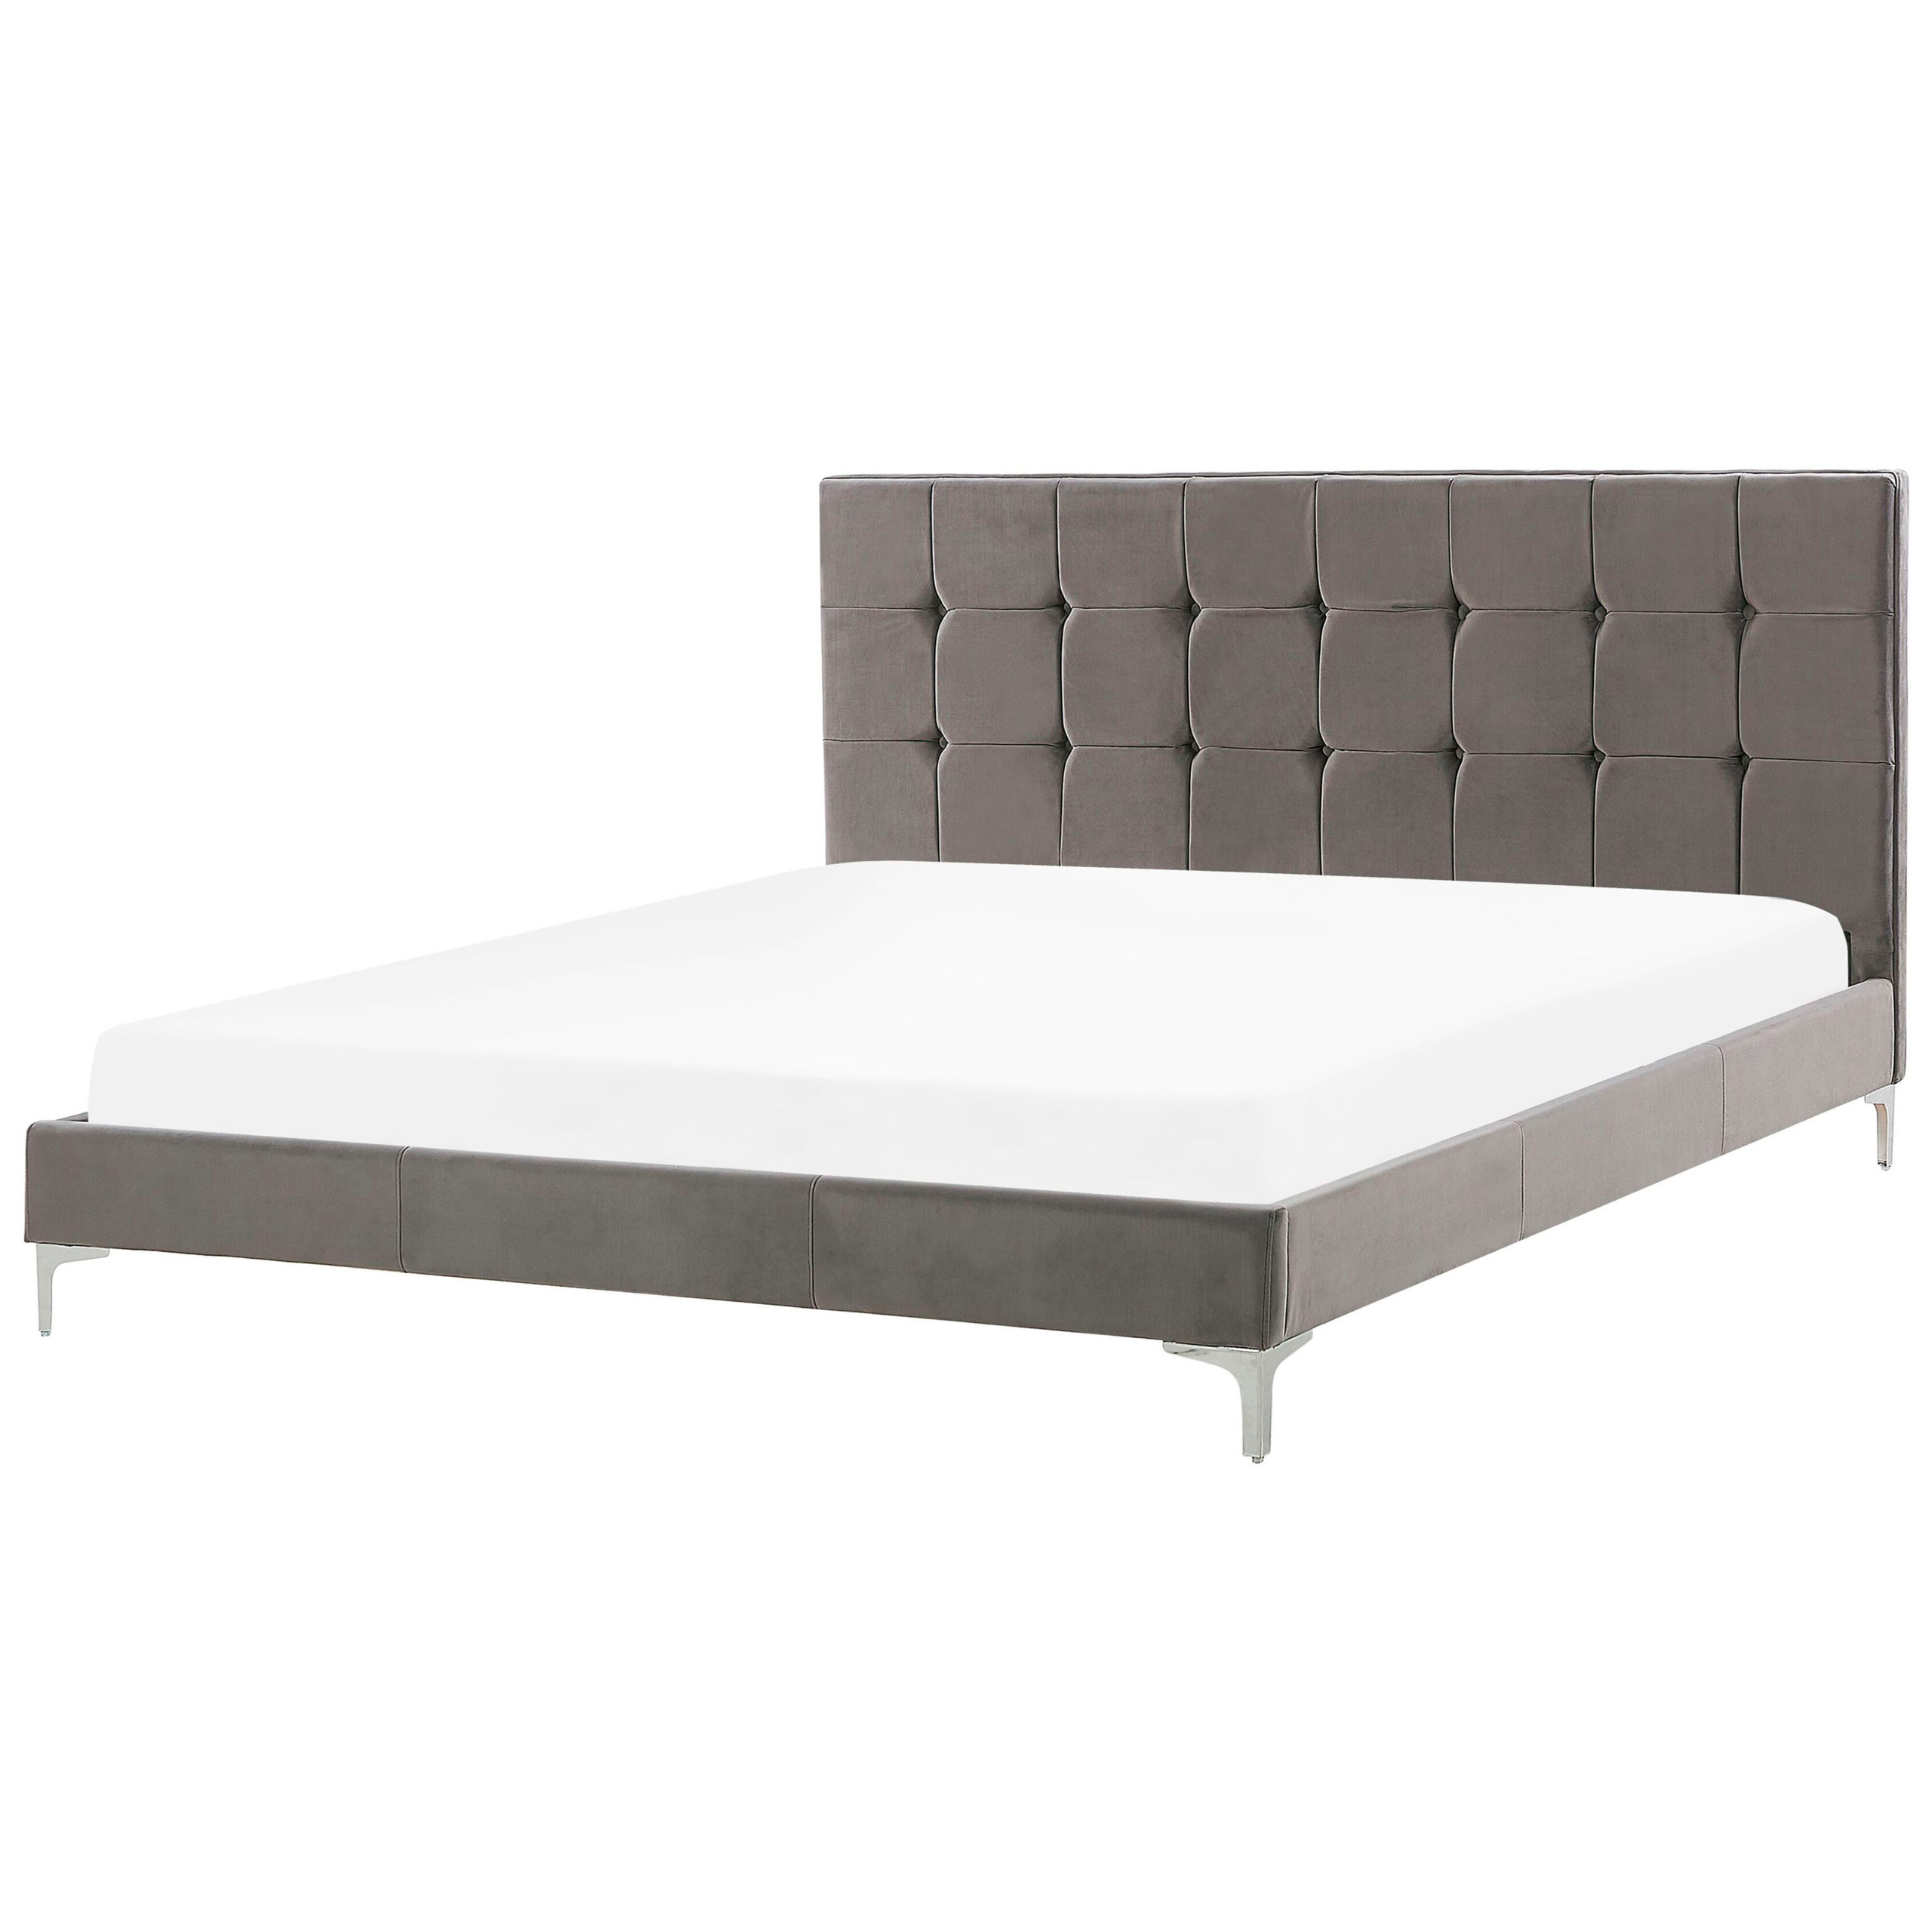 Beliani Bed Frame Grey Velvet Upholstery EU Double Size 4ft6 with Sprung Slatted Base and Button-Tufted Headboard